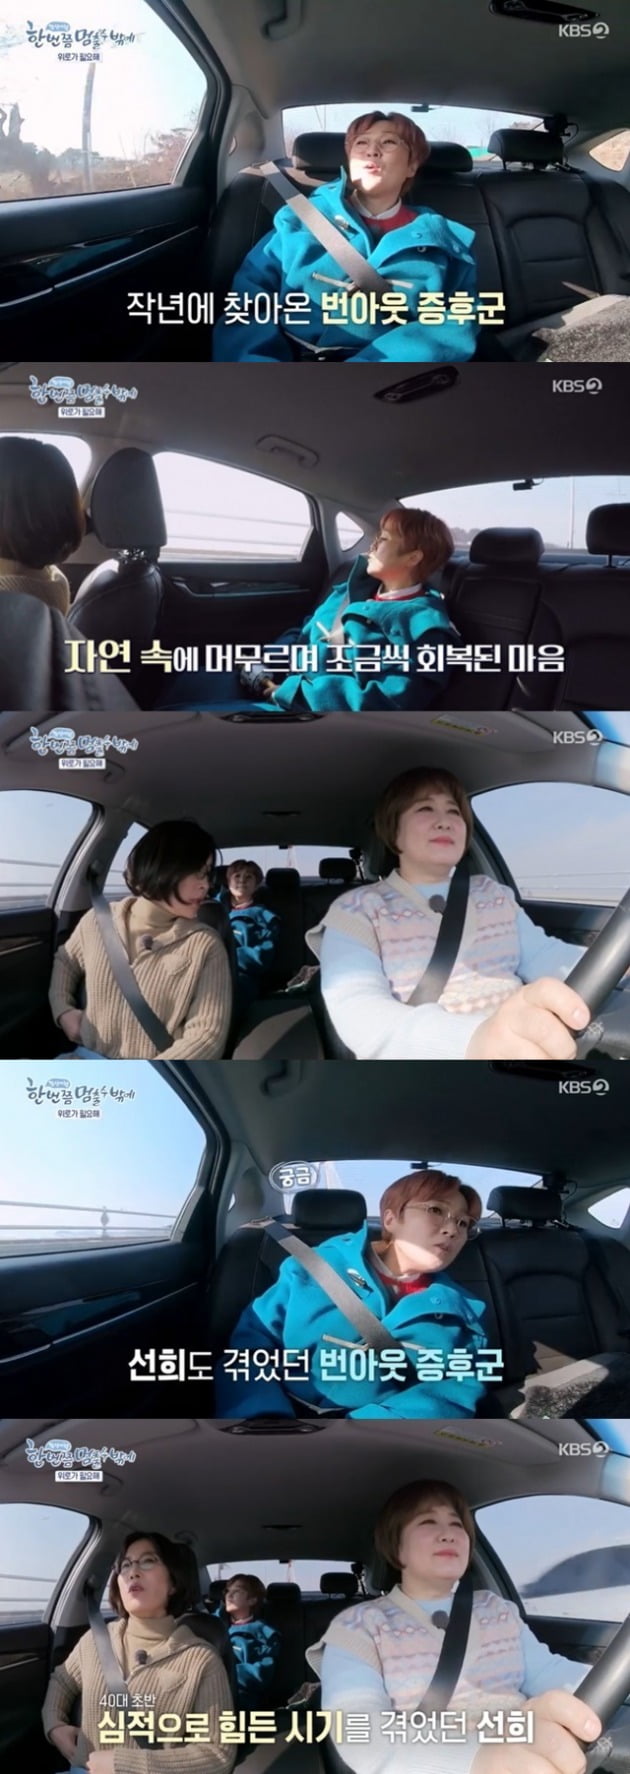 Broadcaster Song Eun-yi, 50, has suffered Burn In-N-Out Burger, Confessions said.KBS2 I have to stop once, which was broadcast on the 24th, is a slow slow-track documentary program that leaves on beautiful roads in Korea.On this day, Song Eun-yi appeared as a guest and traveled to Ganghwa Island with Lee Geum-hee and Lee Sun-hee.Lee Geum-hee introduces Song Eun-yi as Lee Sun-hee doppelganger, saying, Circle glasses are similar.So Song Eun-yi envied, Lee Sun-hee has not been able to meet any years.The three people visit an old stationery store and prove popular by discovering pictures of Lee Sun-hees 7th album.When asked about her concerns these days, Lee Sun-hee said, My eyes keep getting smaller, I want to see a lot, but my eyes keep falling.Song Eun-yi also mentioned his relationship with Lee Sun-hee.Twenty years ago, Sunhee called melons to her home and gave them to her, and there has never been an exchange since she gave melons and lost contact, he recalled.Lee Sun-hee said, I gave it to my daughter in the field and picked it up. I wanted to get close after that, but I was careful whether it seemed polite.Since then, the three have proposed to make a music video with Lee Sun-hee song, and under the guidance of Song Eun-yi, they have created a music video with the song Young as an alumni concept.Lee Sun-hee and Lee Geum-hee asked Song Eun-yi, I will not have time for my rich Song Eun-yi.Song Eun-yi said, I did not know that I was dull about me, but I had In-N-Out Burger syndrome last year.I was sad and sad, and I had a moment of helplessness when I came to see it, Song Eun-yi said. I started camping to have my time, and I stayed in nature and recovered a little bit when I was in the mood.Lee Sun-hee also suffered an In-N-Out Burger in his early 40s.I was comforted by the trip, I tried to live a healthy life by contacting here and there, he said. I tried to talk a lot, he said.